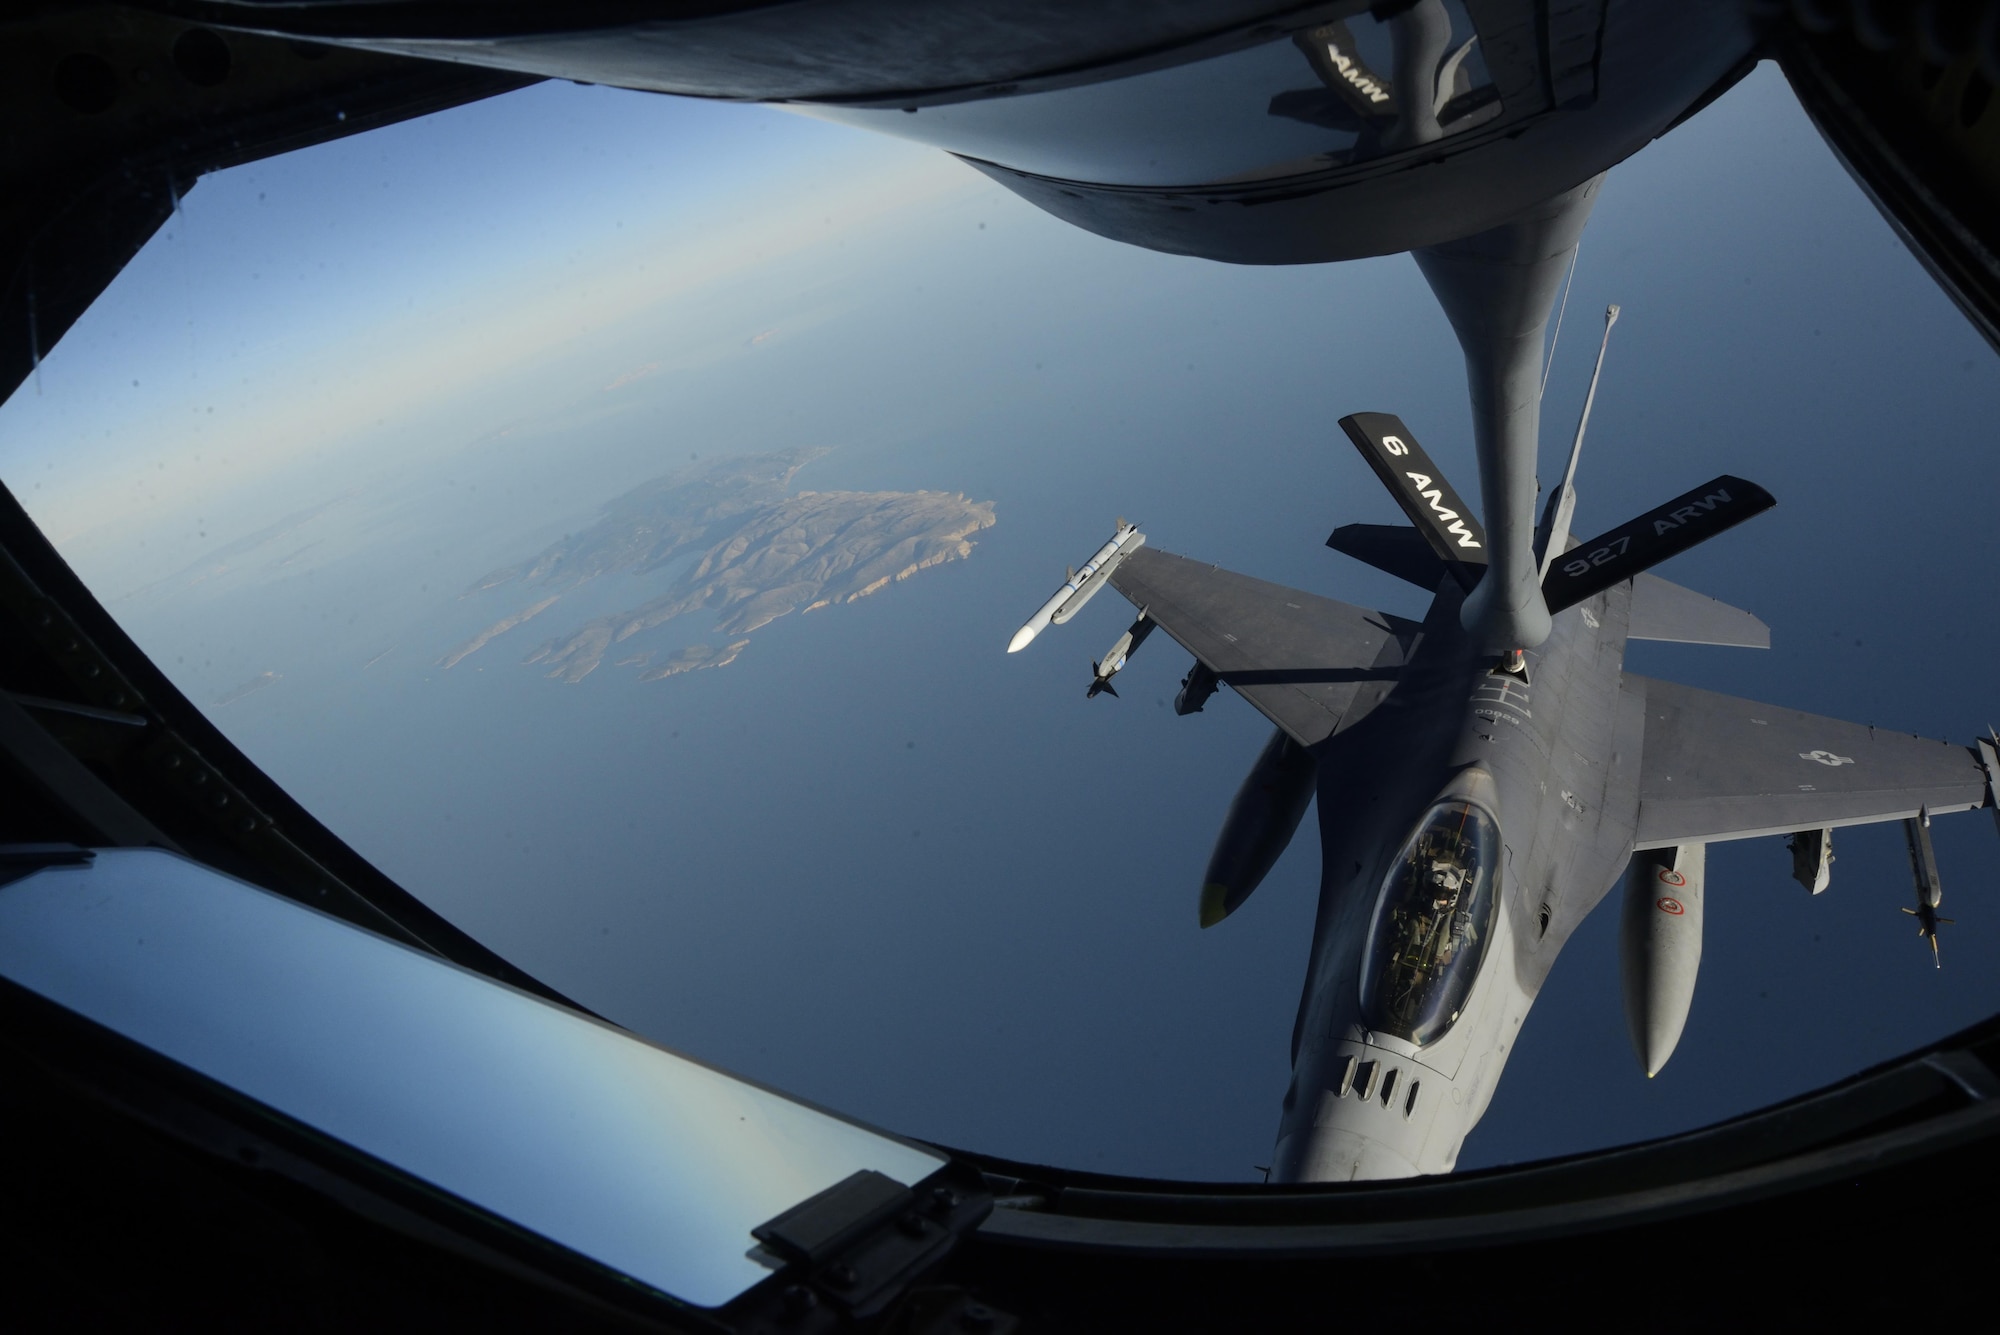 A KC-135 Stratotanker, assigned to the 63rd Air Refueling Squadron at MacDill Air Force Base, Fla., refuels an F-16 Fighting Falcon, assigned to the 480th Expeditionary Fighter Squadron at Spangdahlem Air Base, Germany, during a flying training deployment at Souda Bay, Greece, Feb. 2, 2016. The 63rd ARS operated out of Souda Bay Naval Air Station for the duration of the flying training deployment. (U.S. Air Force photo/Staff Sgt. Christopher Ruano)